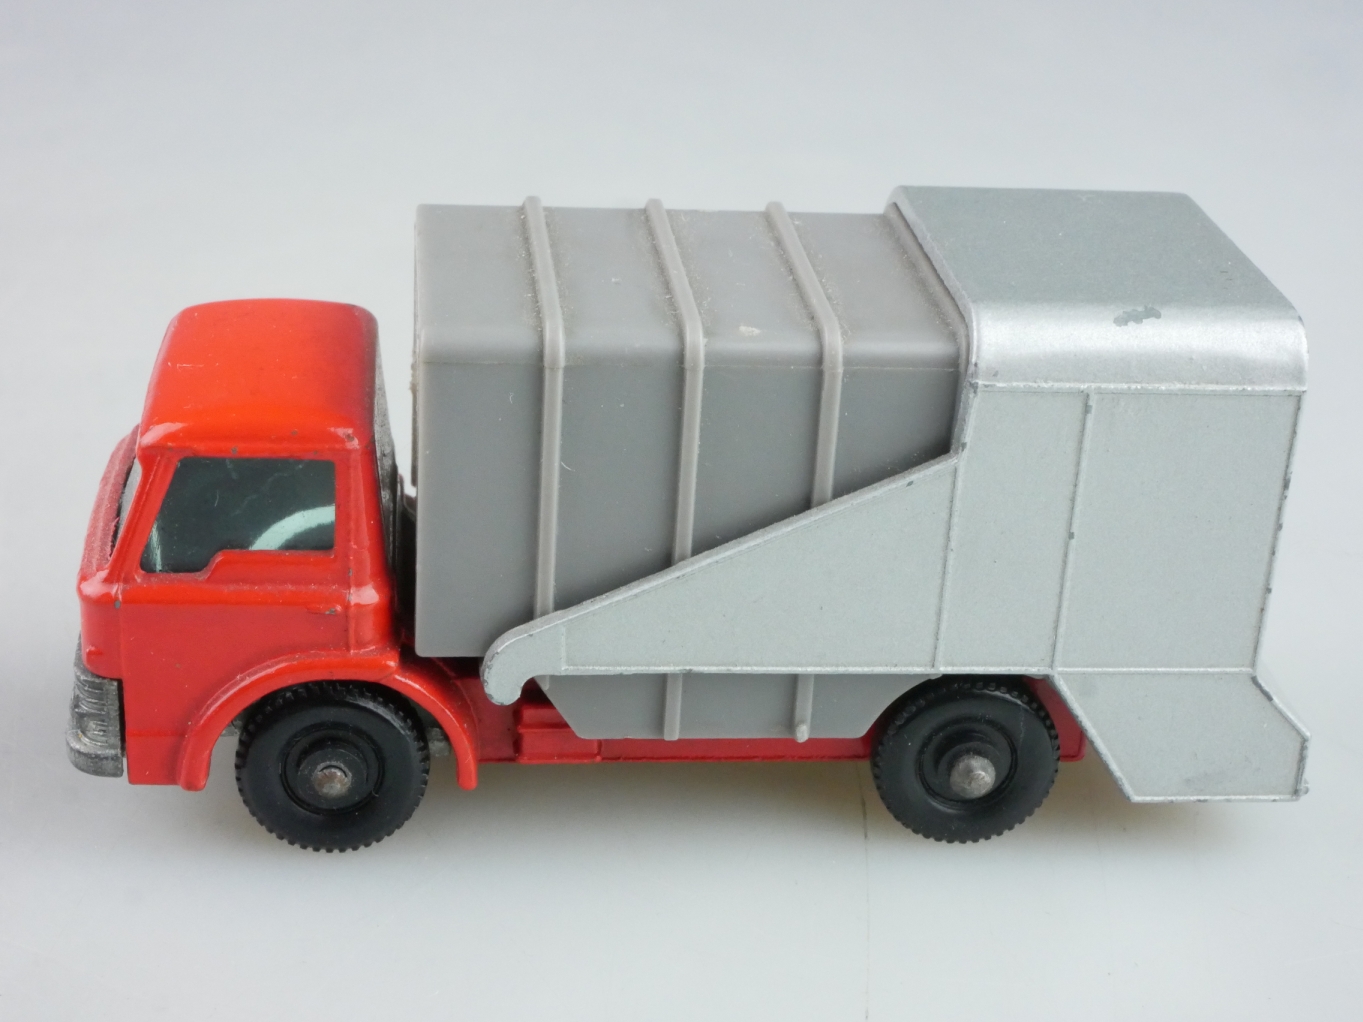 07c Ford Refuse Truck - 38098